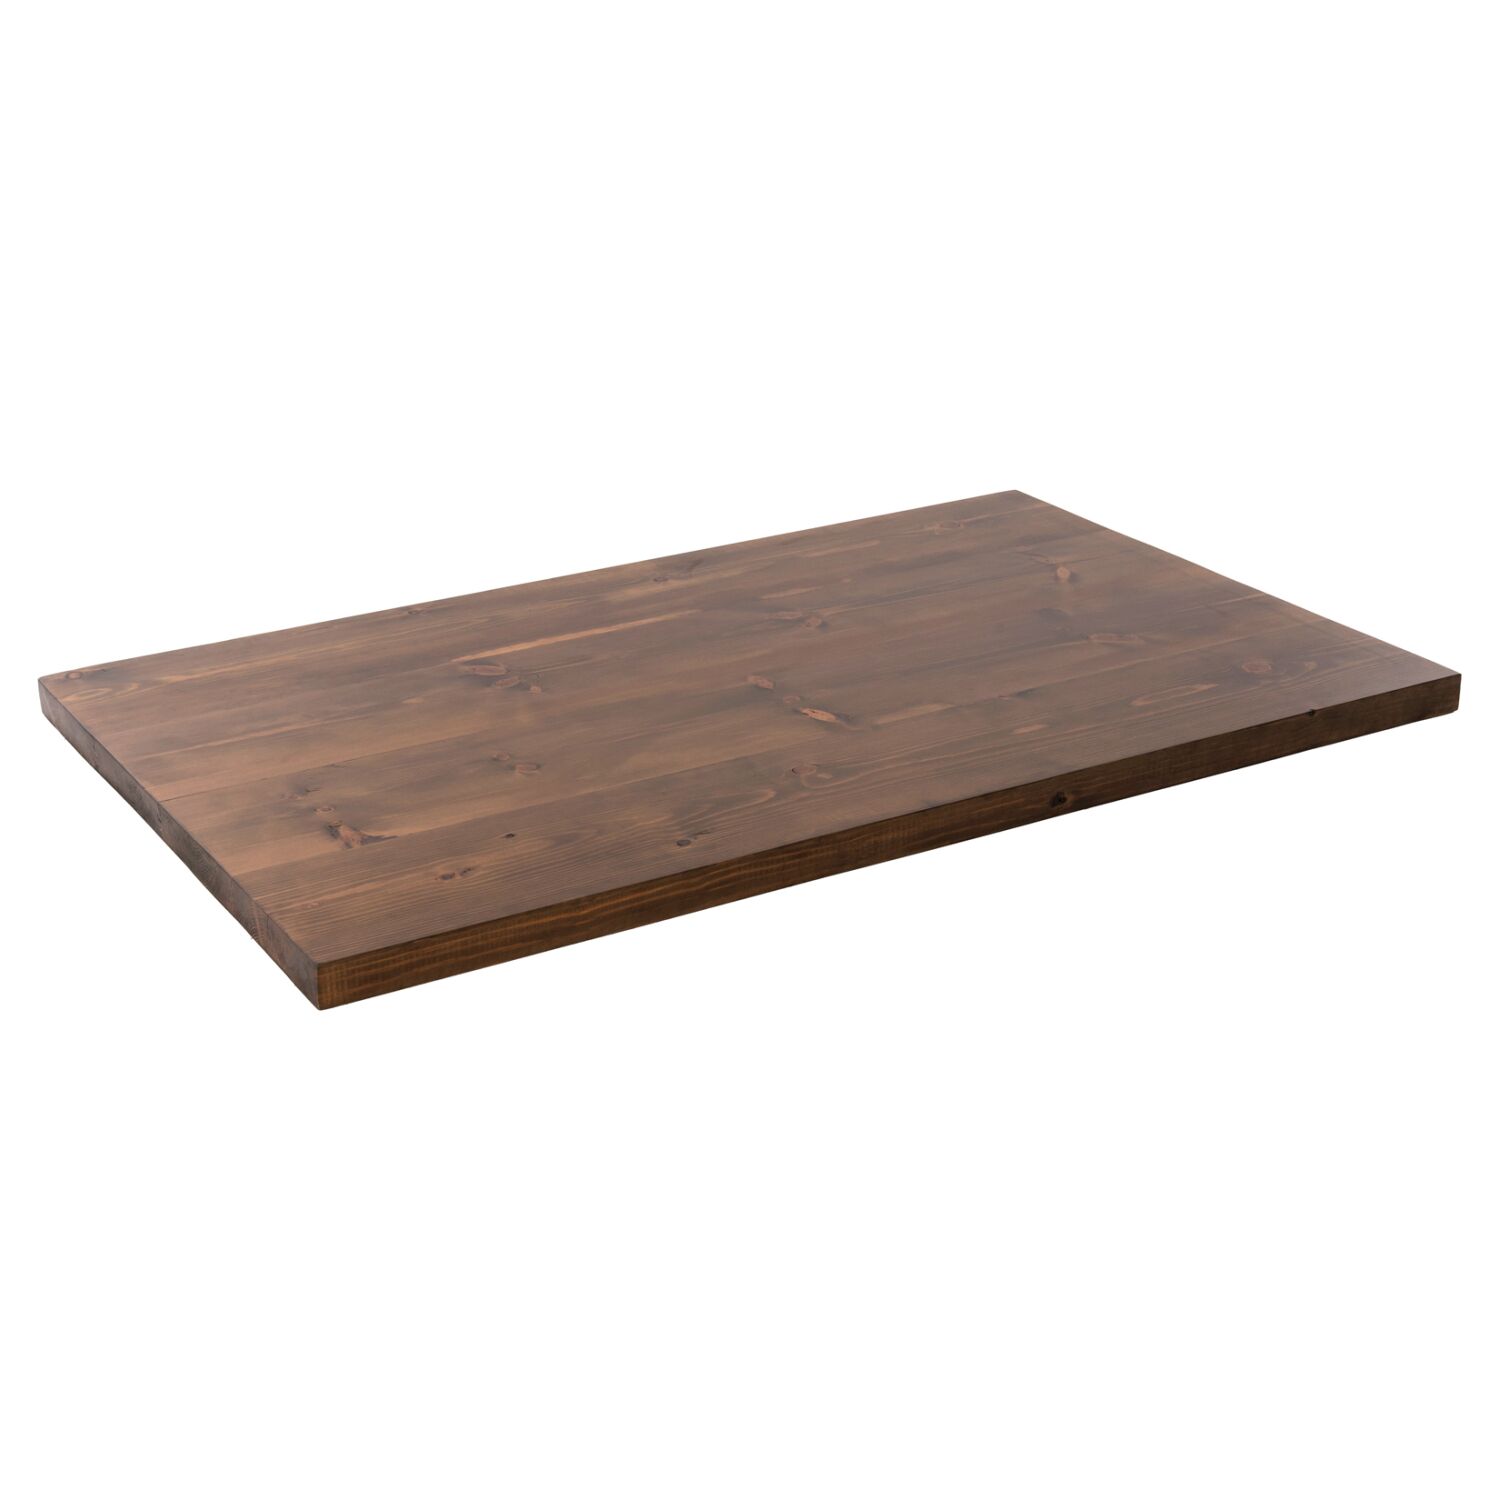 epifaneia trapezioy fb96151 masif xylo e 5 TABLETOP HM6151 SOLID FIR WOOD IN WALNUT VARNISH 120x80x4(thickness)cm.